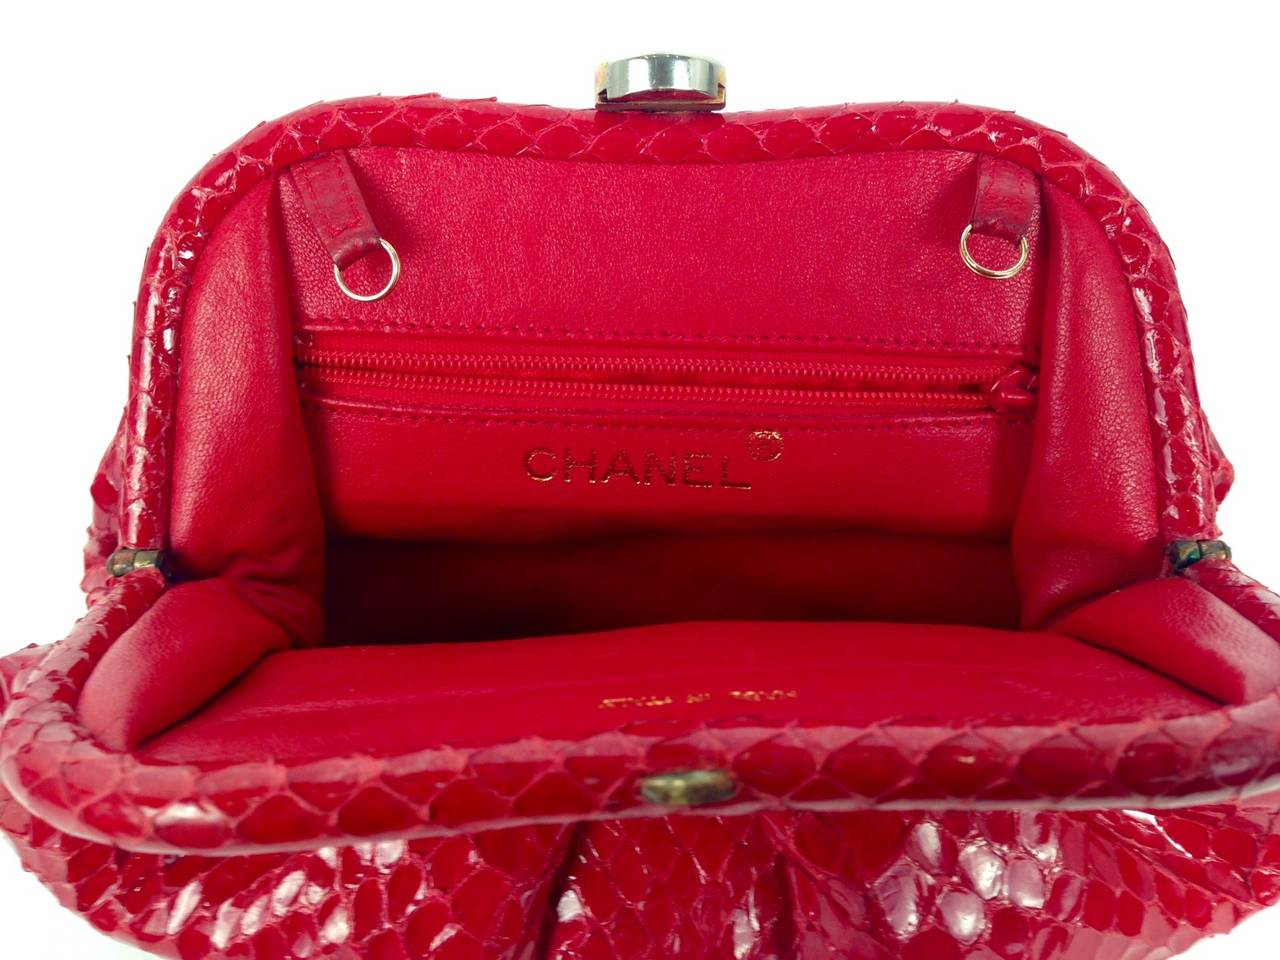 Vintage Chanel Red Python Clutch In Excellent Condition For Sale In Palm Beach, FL